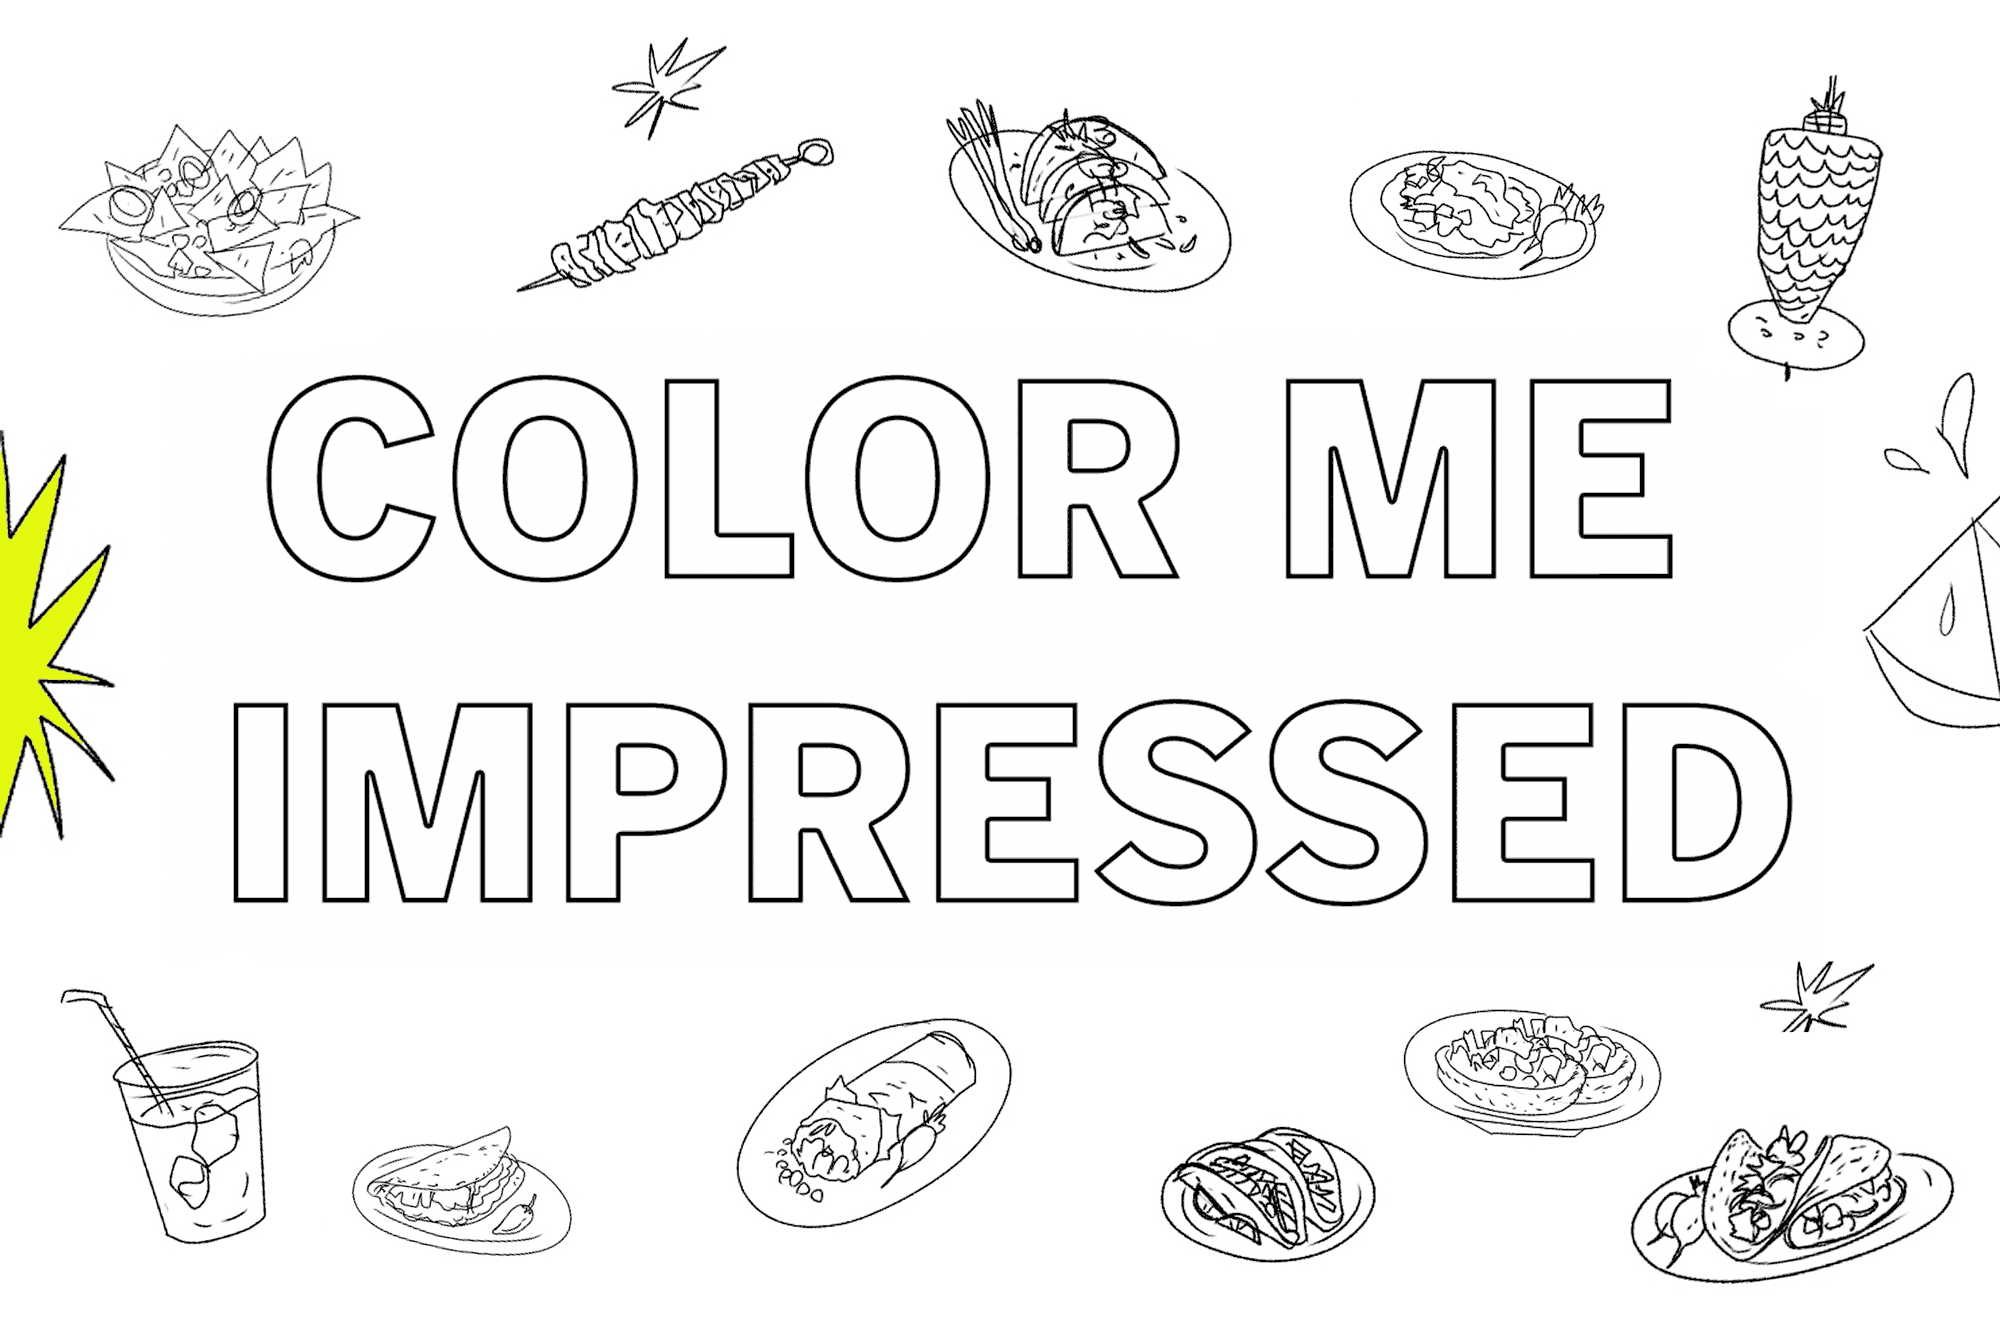 emily the strange coloring pages